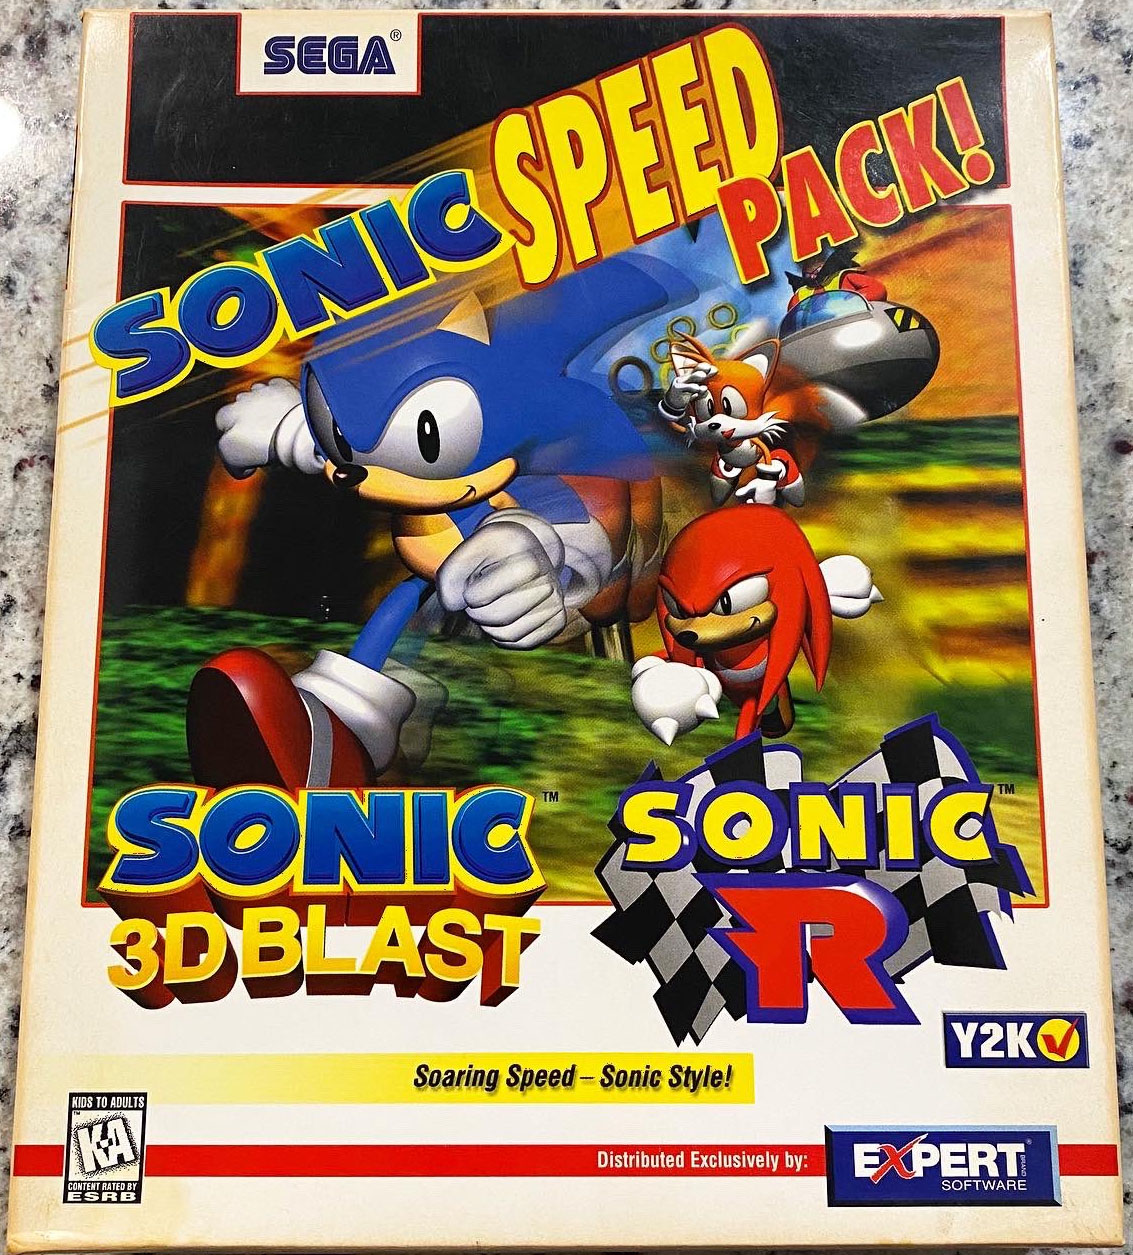 sonic r pc rom download